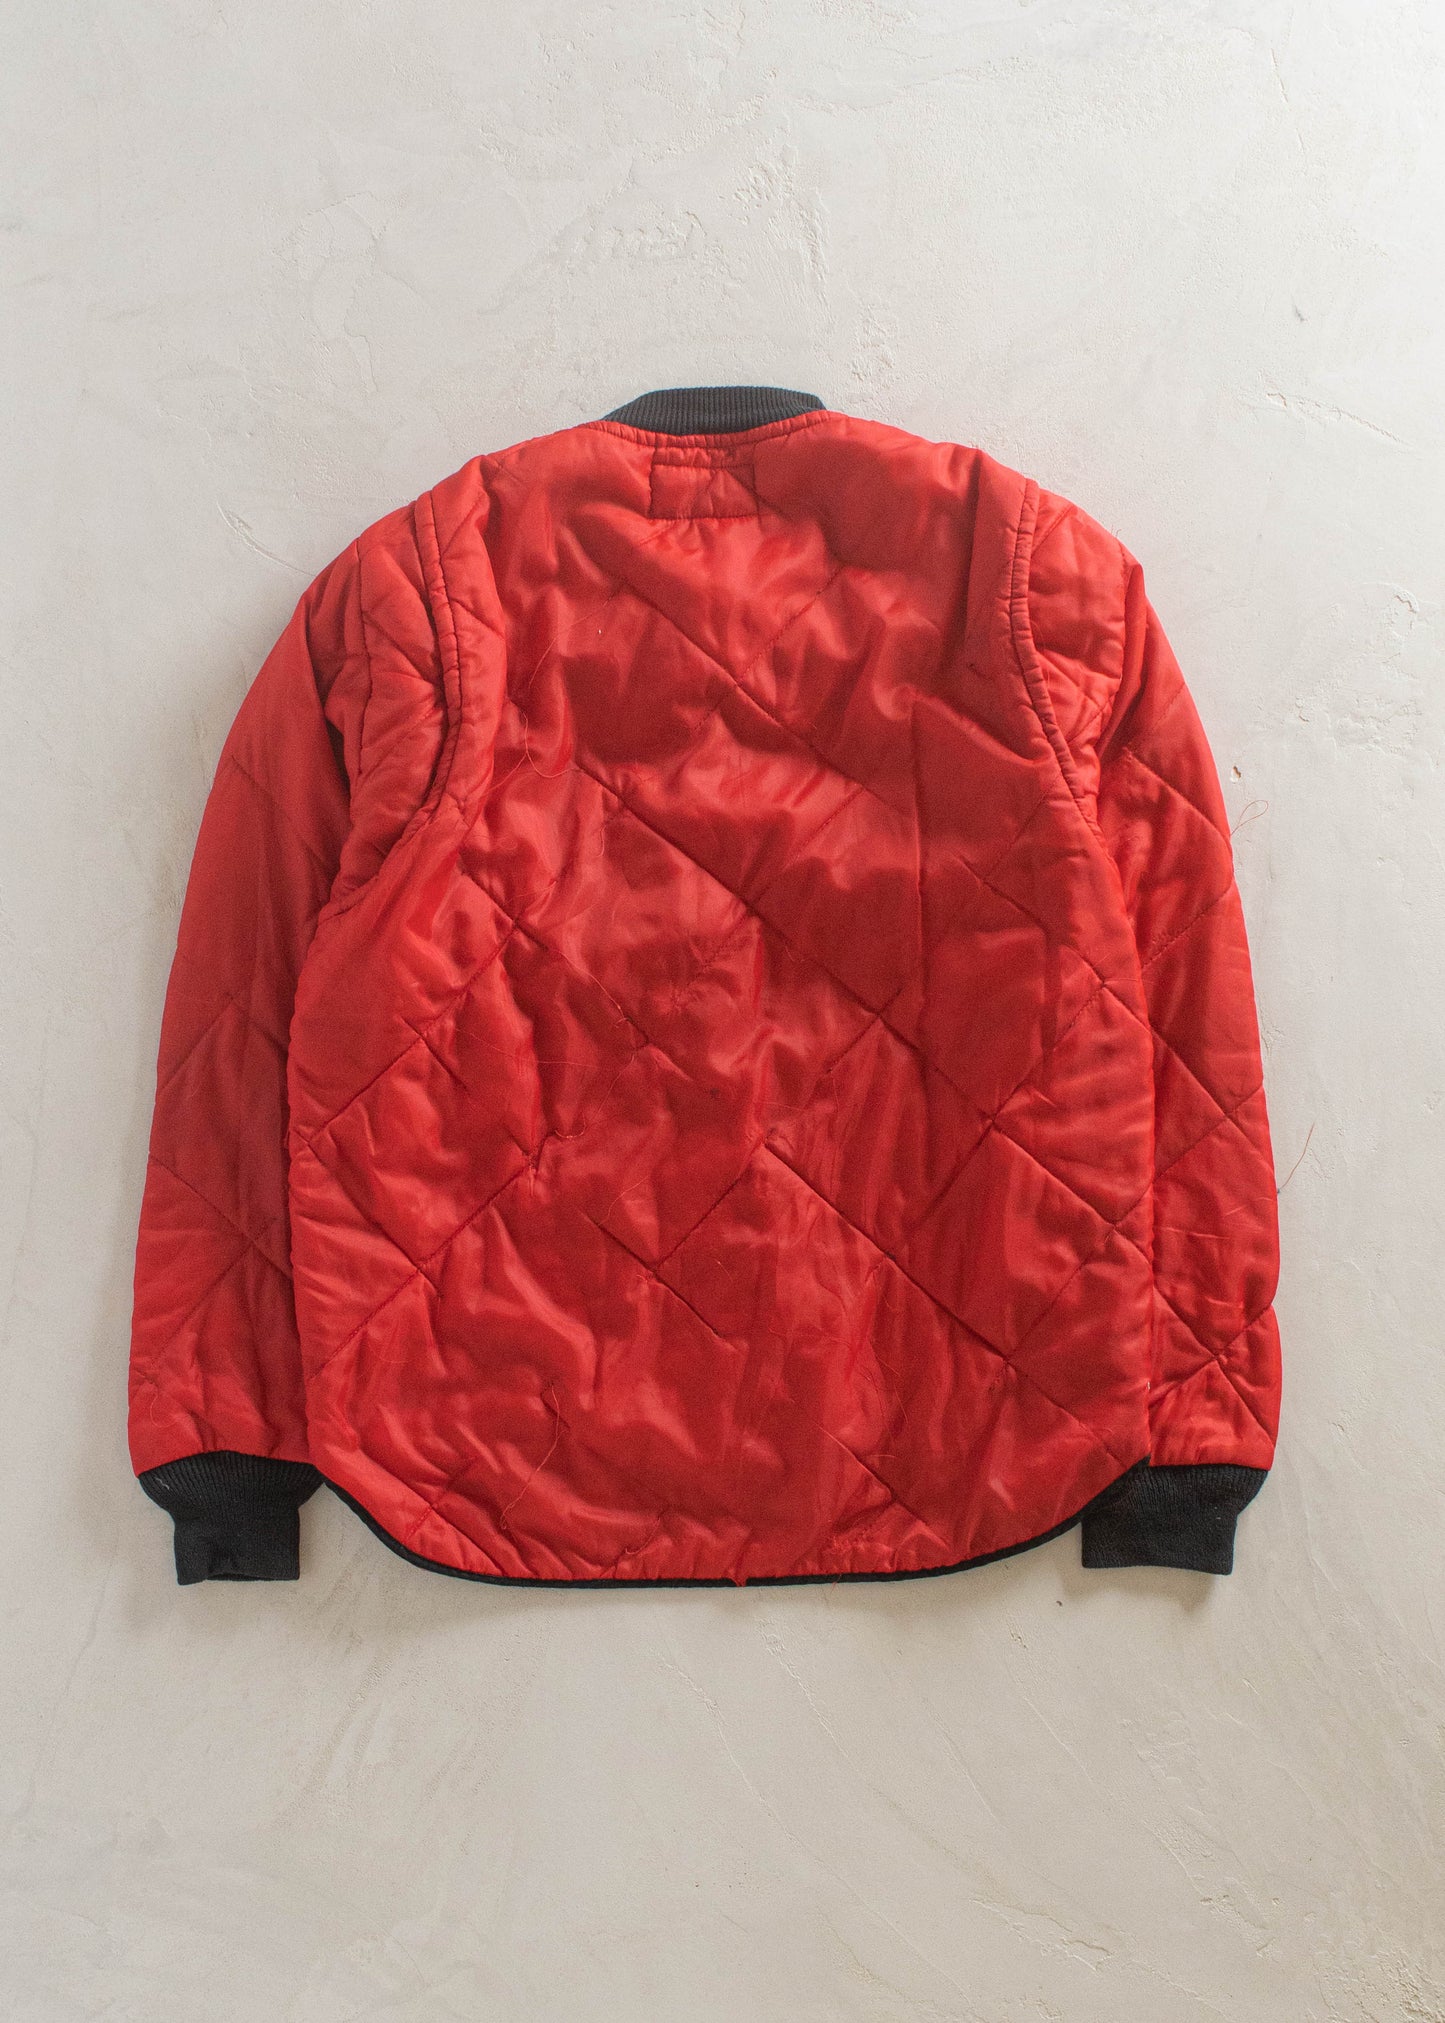 1980s Quilted Liner Jacket Size S/M